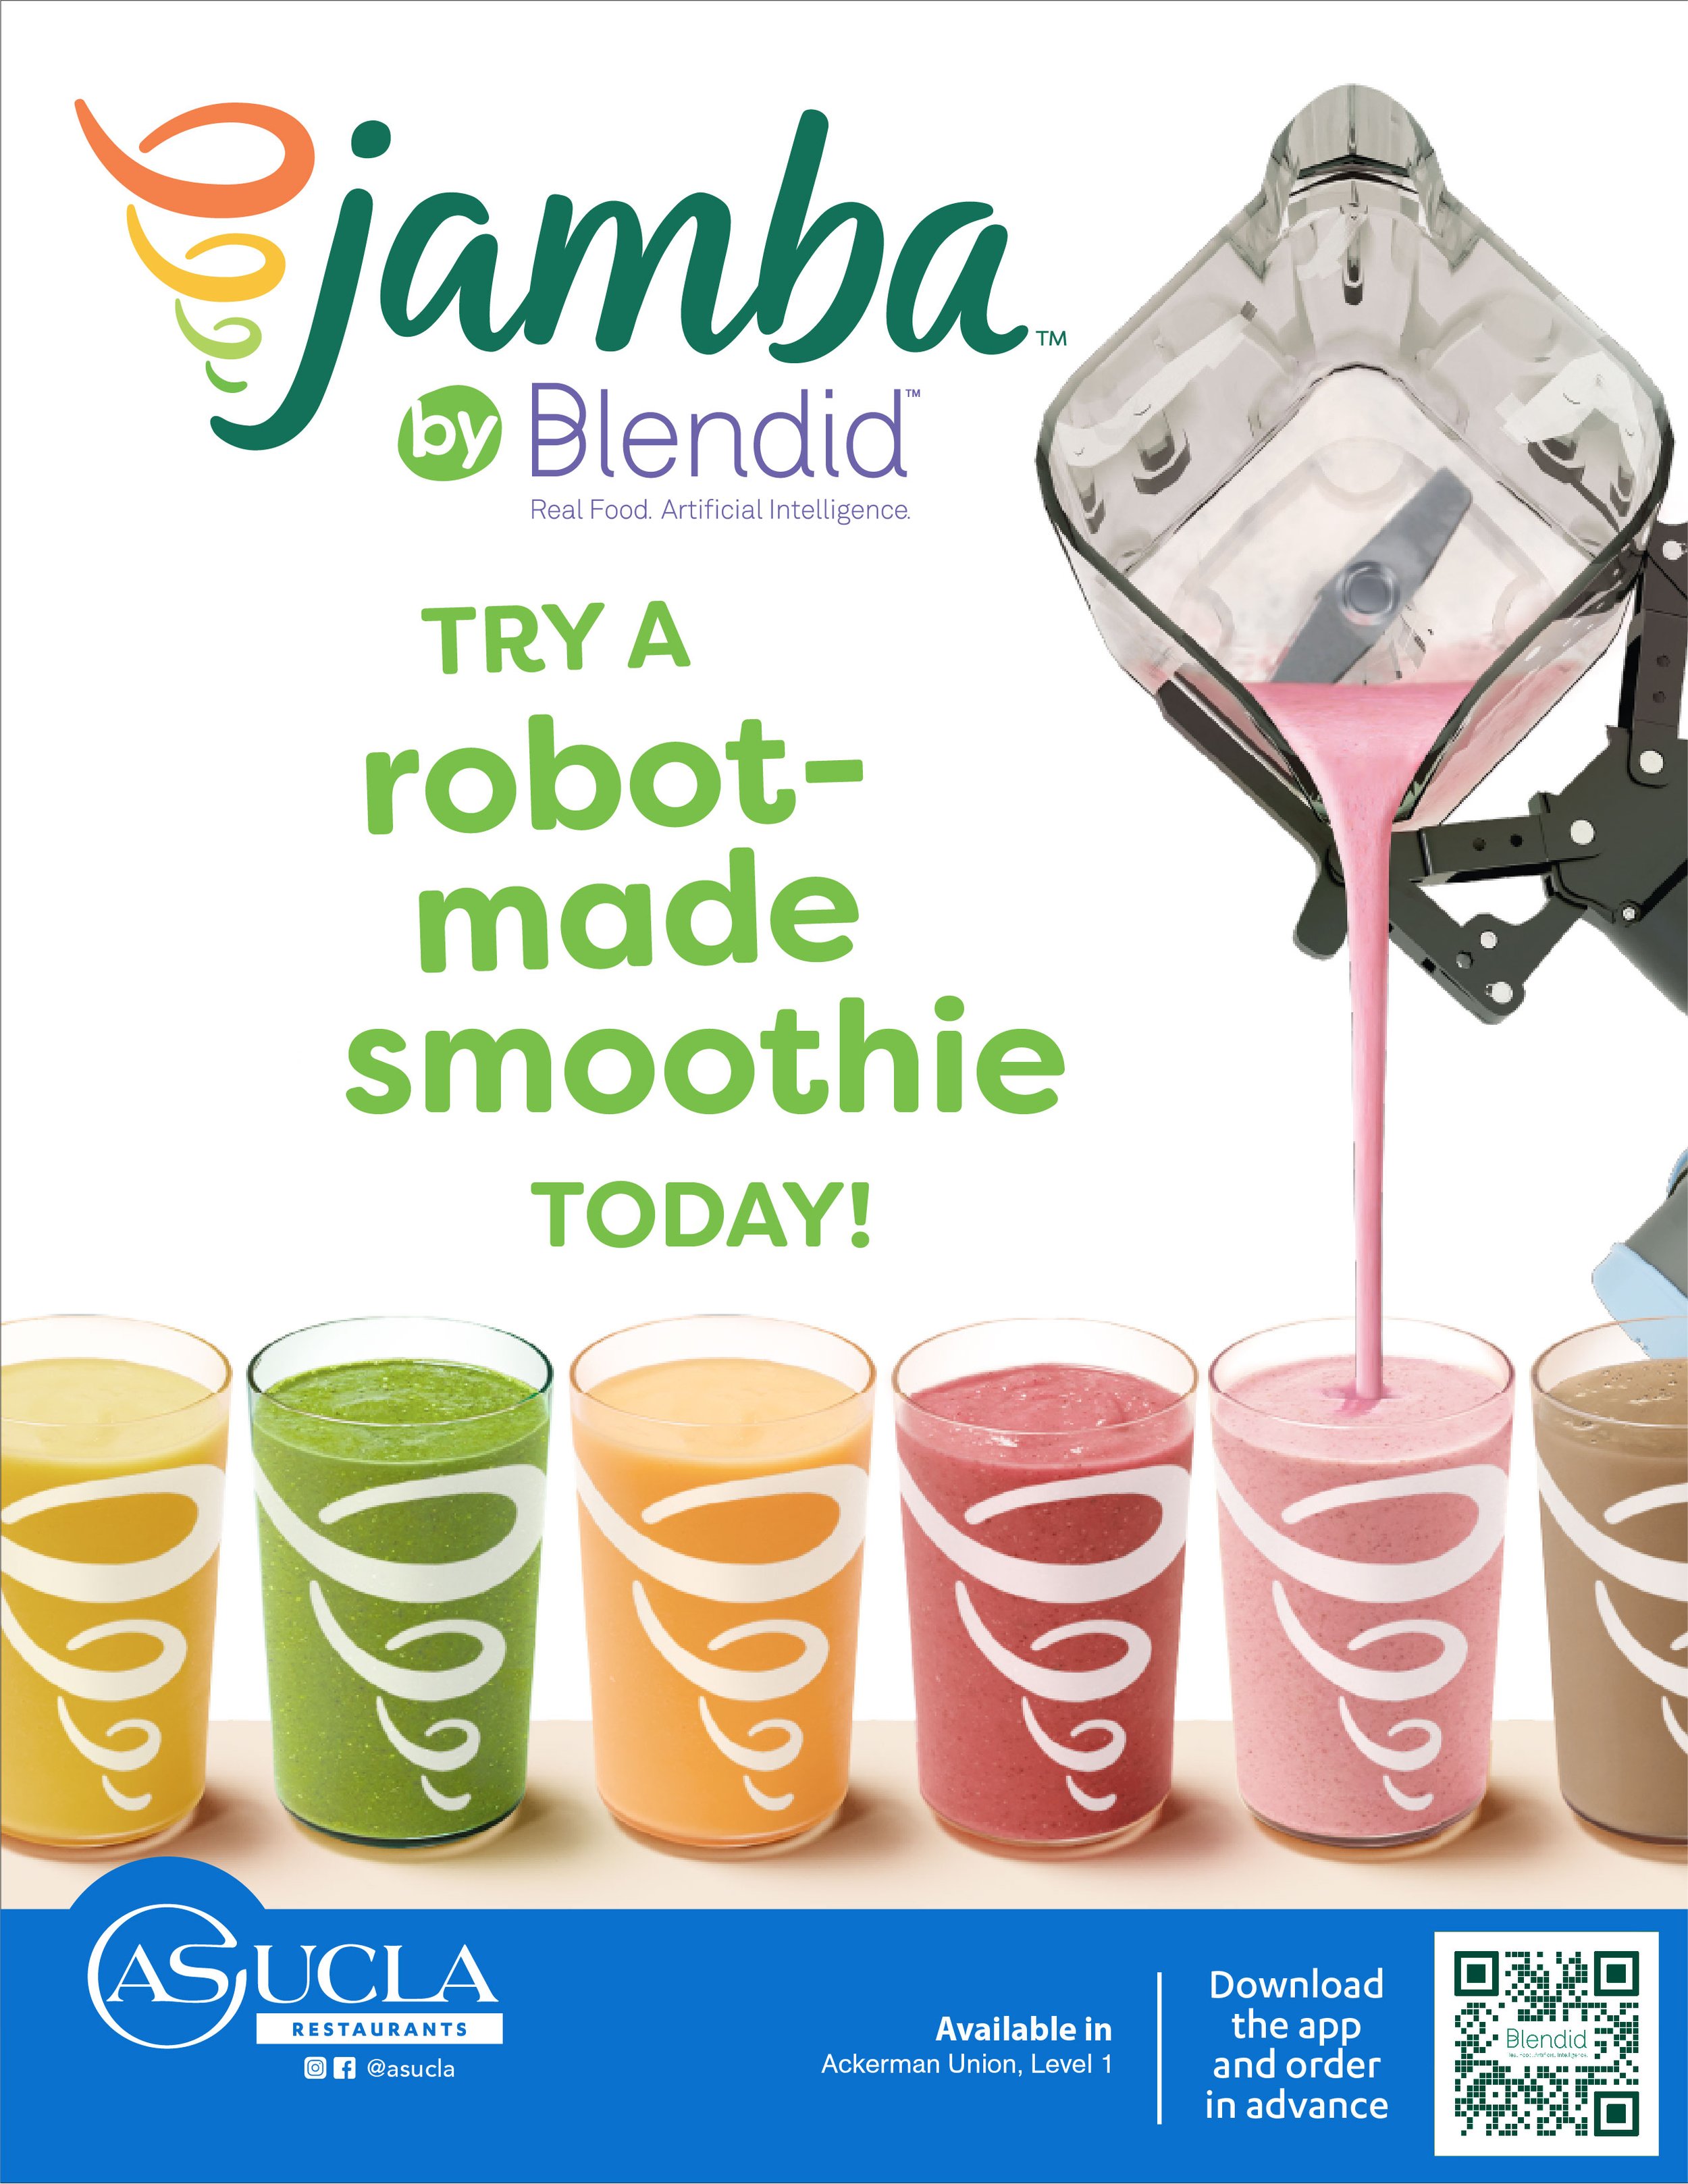 Smoothies artificial — ASUCLA opens UCLA's food kiosk, Jamba by Blendid ASUCLA